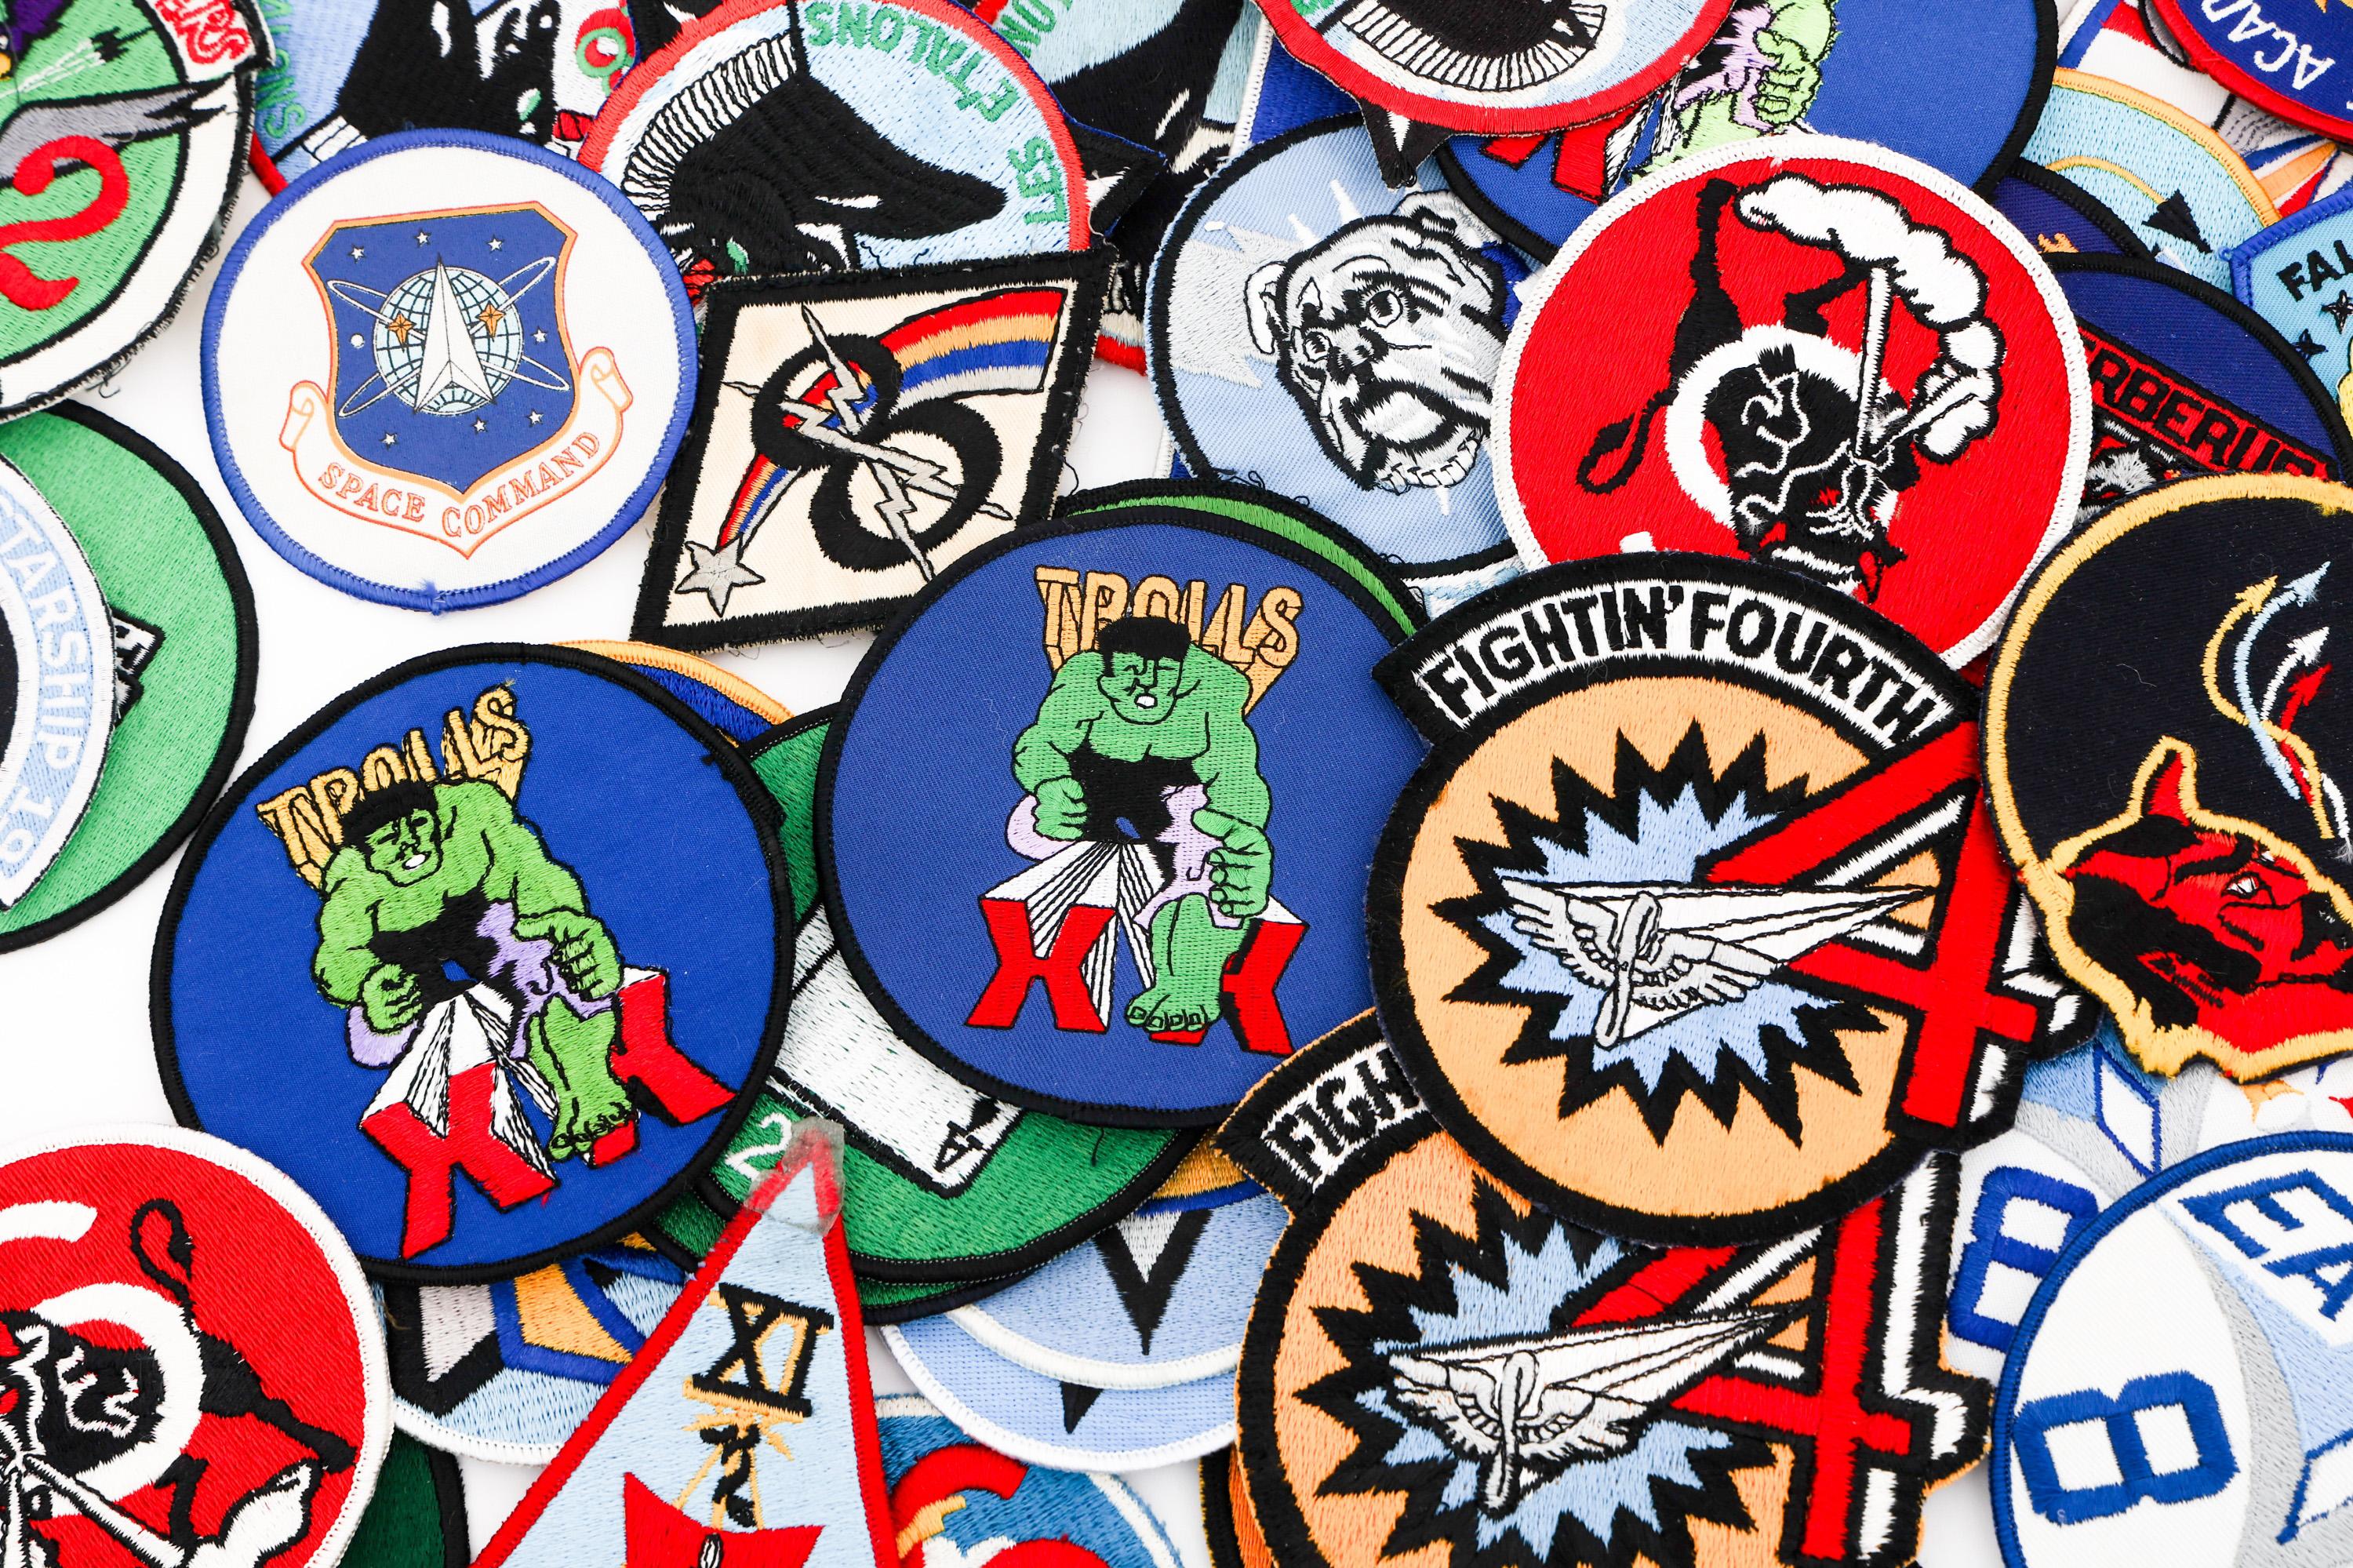 COLD WAR - CURRENT US AIR FORCE SQUADRON PATCHES